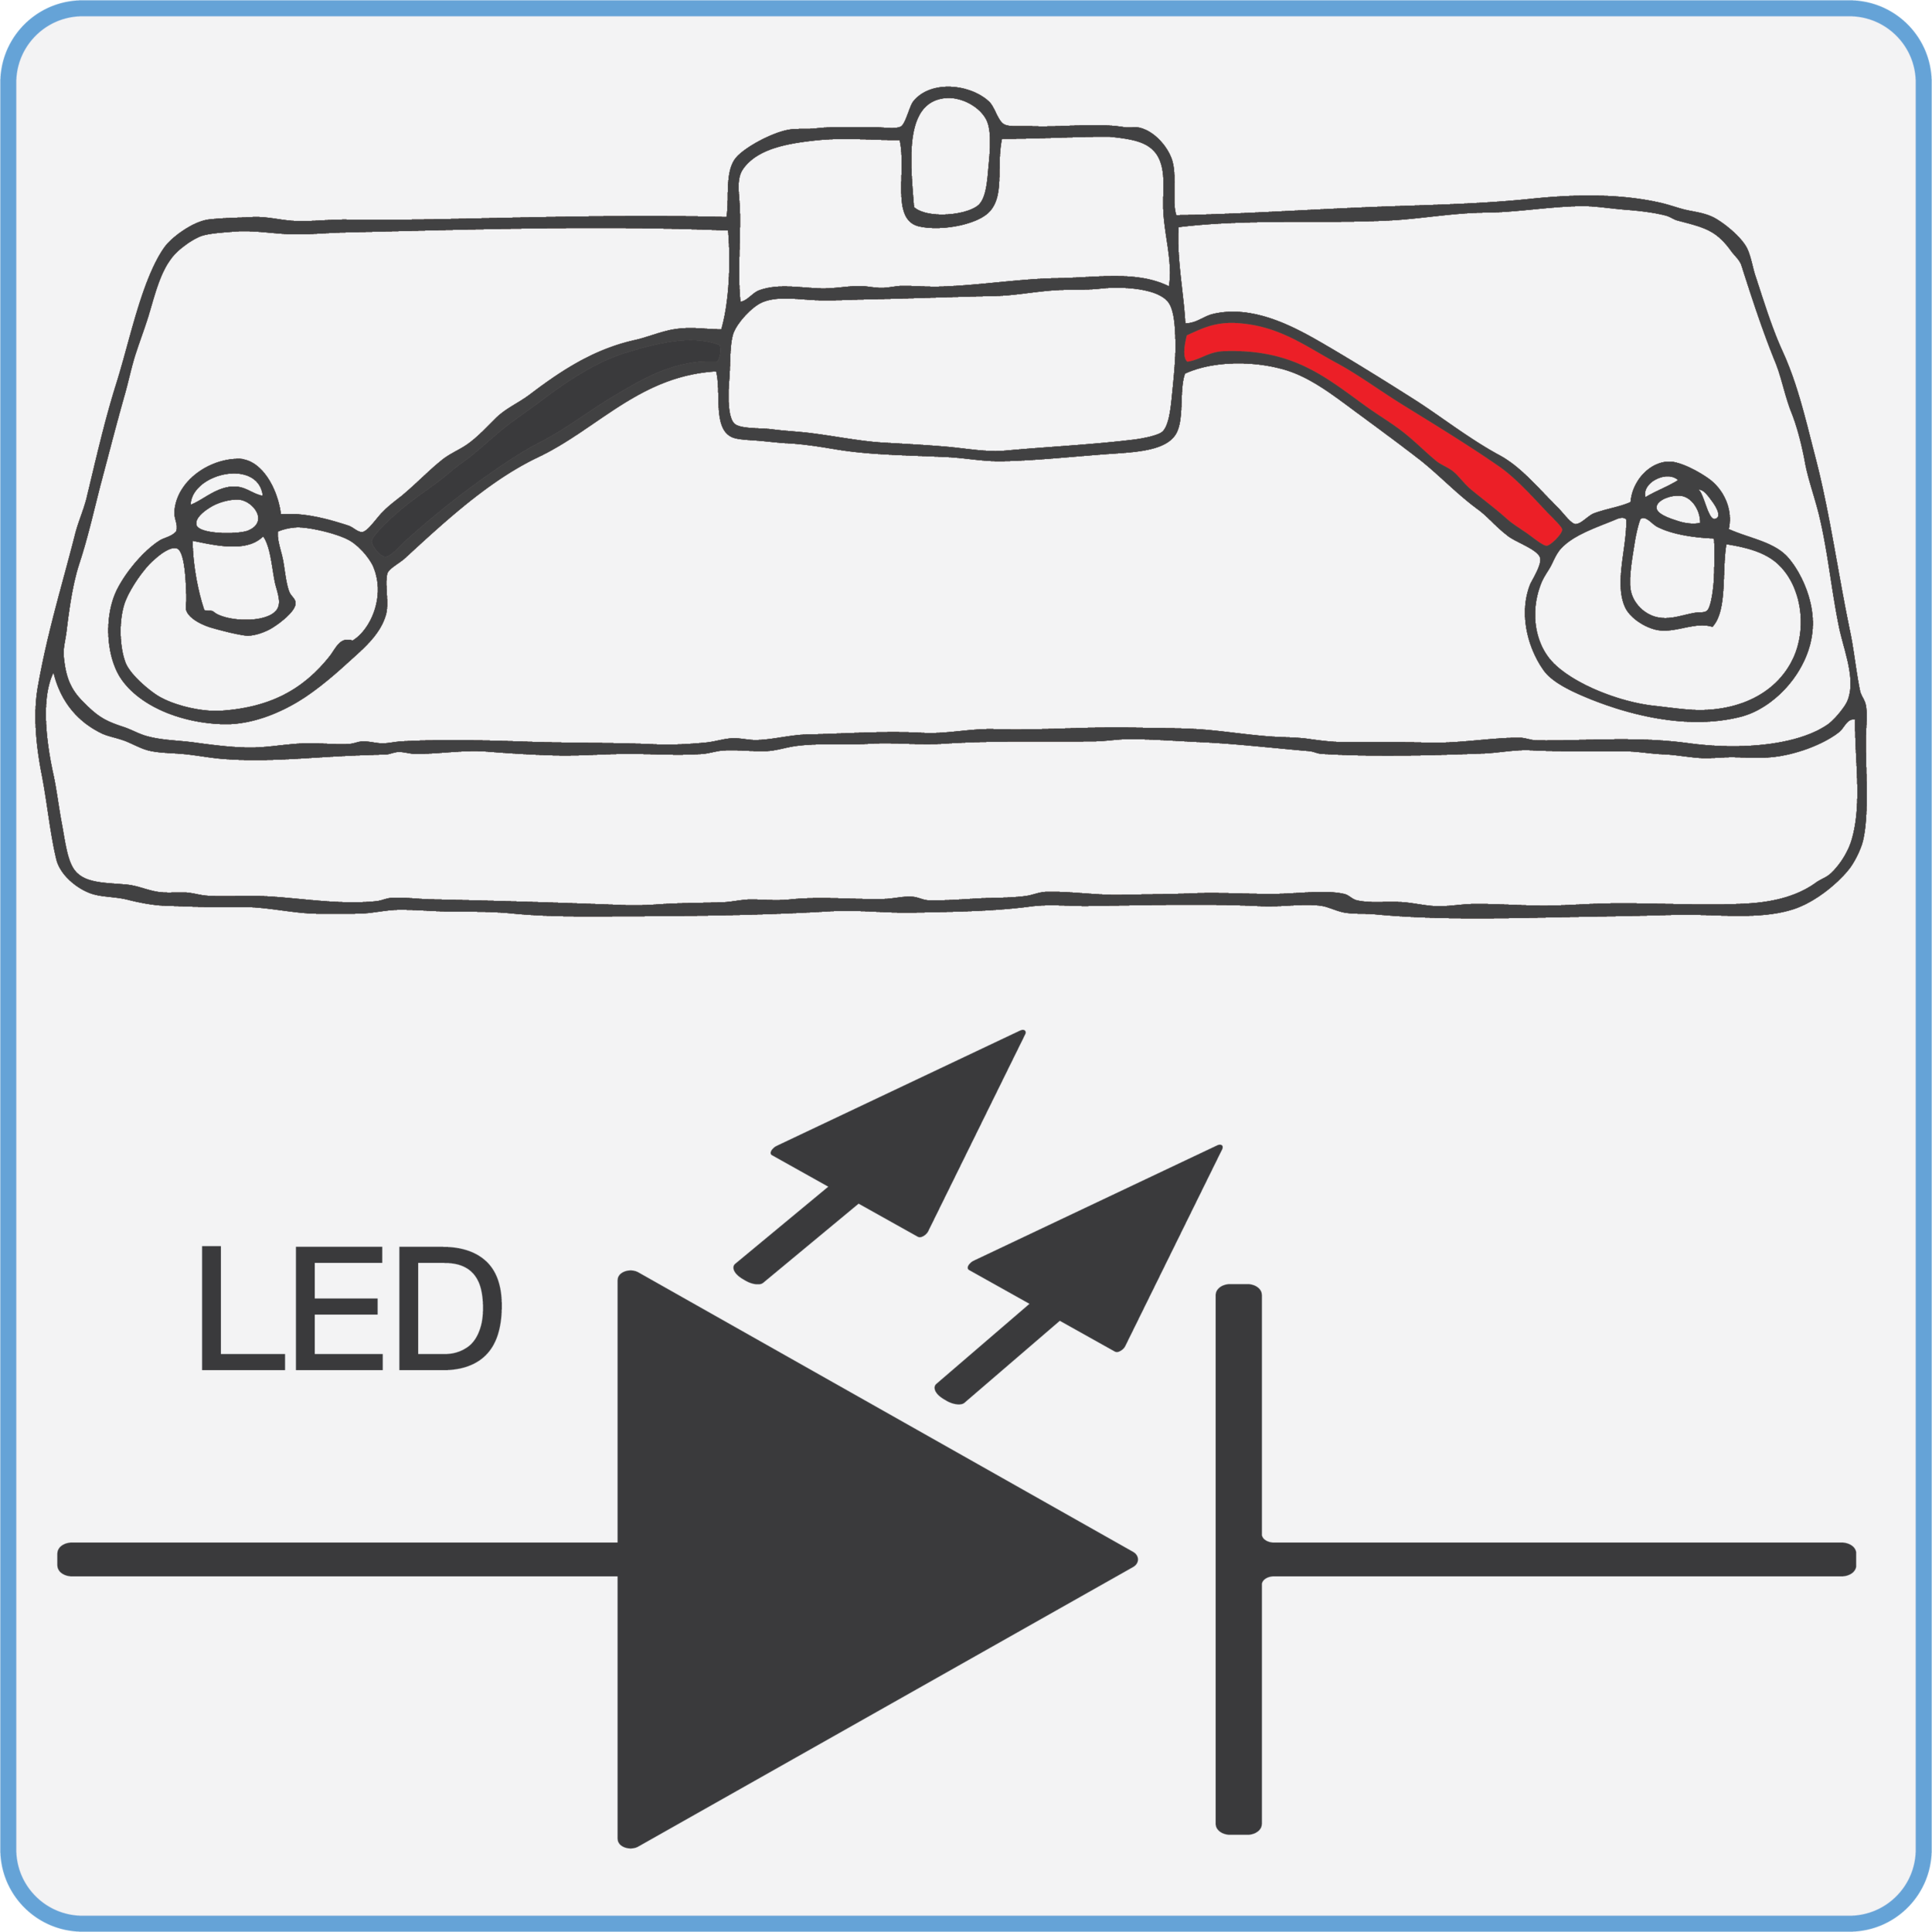 LED-schematic.png